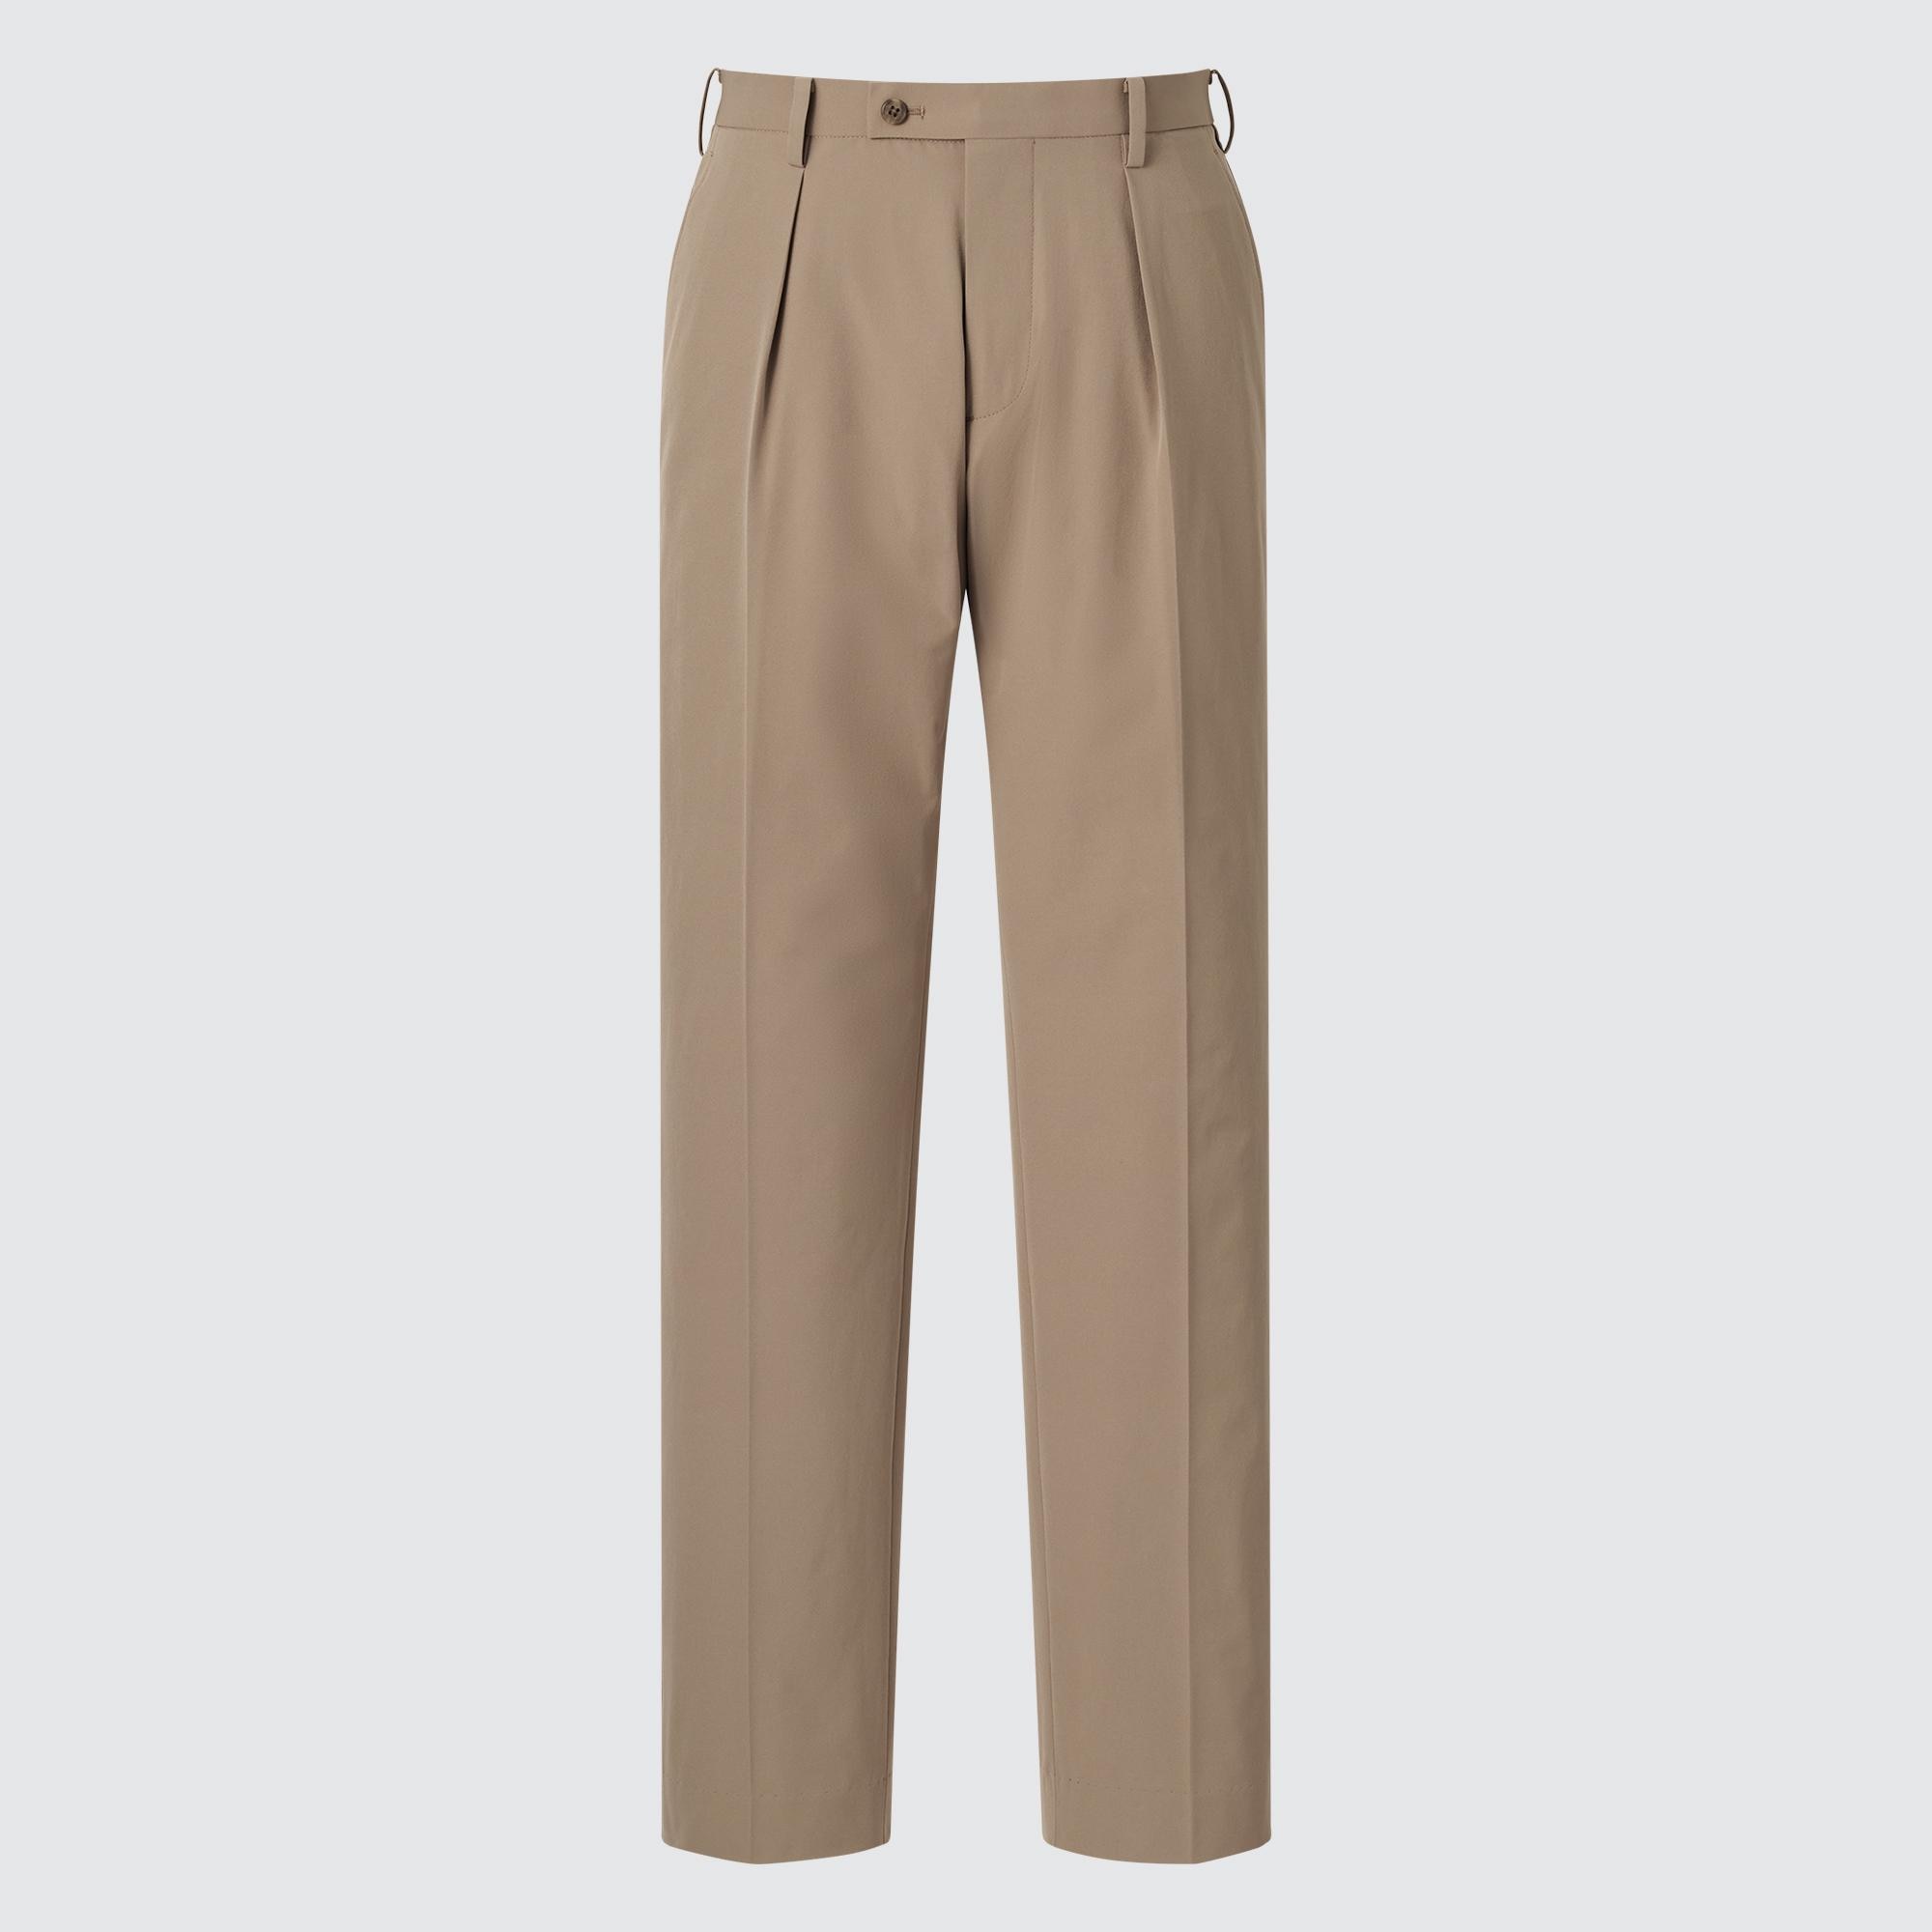 Mens Pleated Trousers  Mens High Waisted Pleated Trousers  boohoo UK